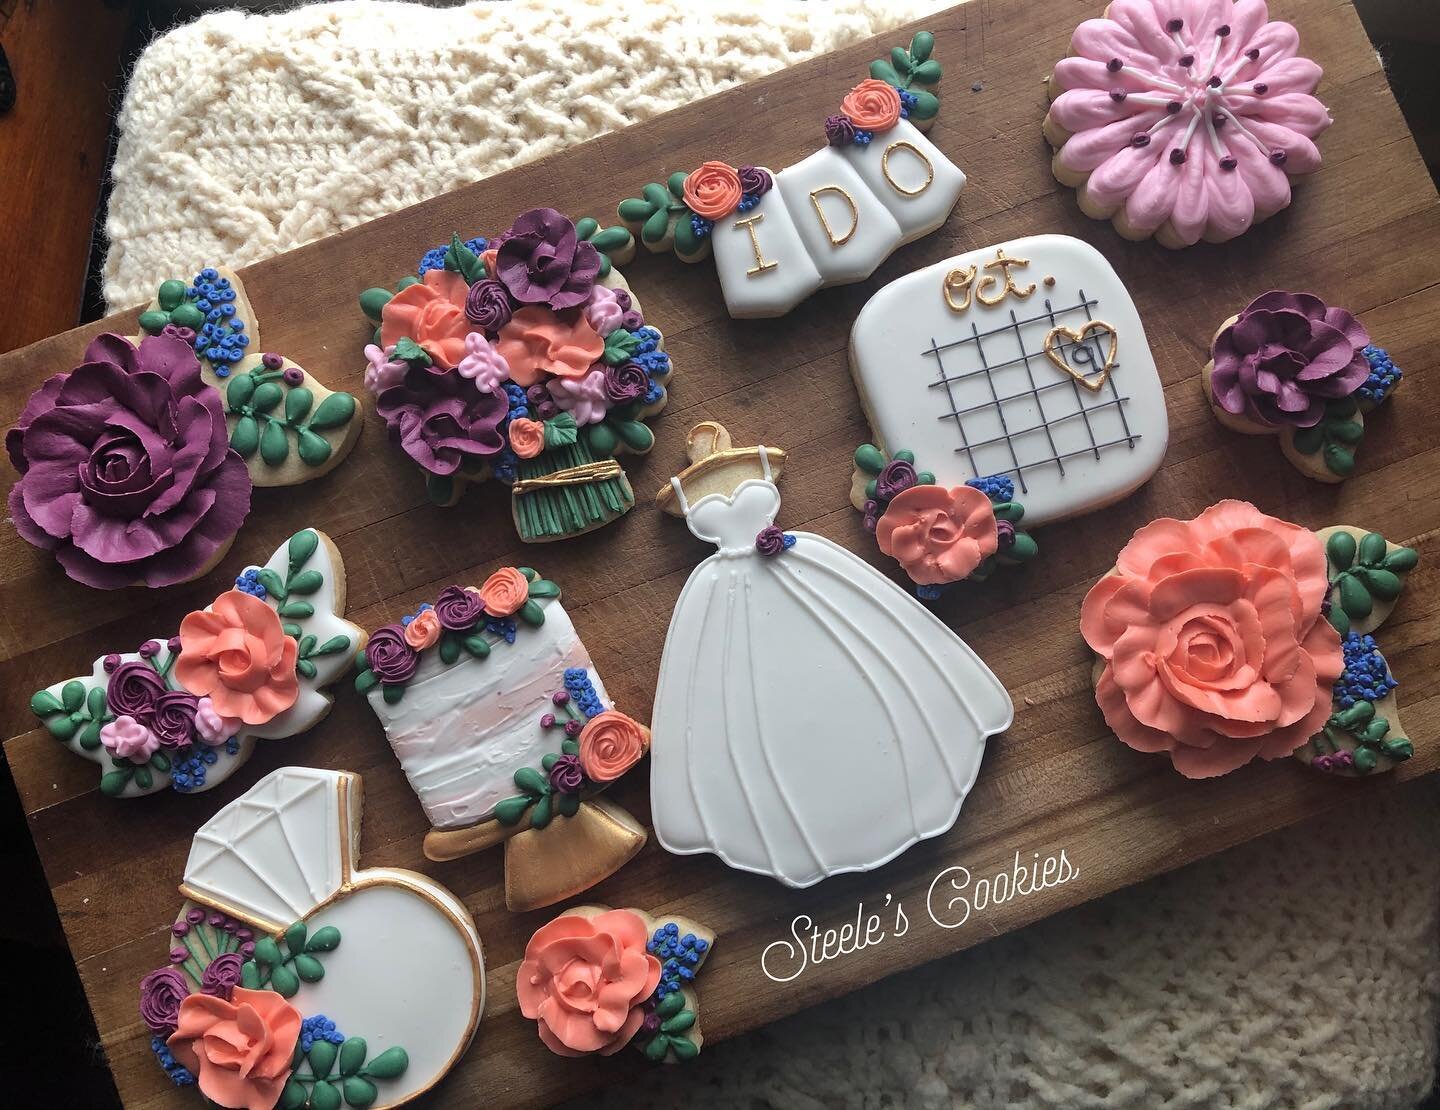 It&rsquo;s #floralfriday so why not share my latest bridal shower creation?! (And a couple closeups of some new cutters) 
.
#bridalshower #bridalshowercookies #cookiesofinstagram #floral #bridalbouquet @kaleidacuts @bobbiscutters